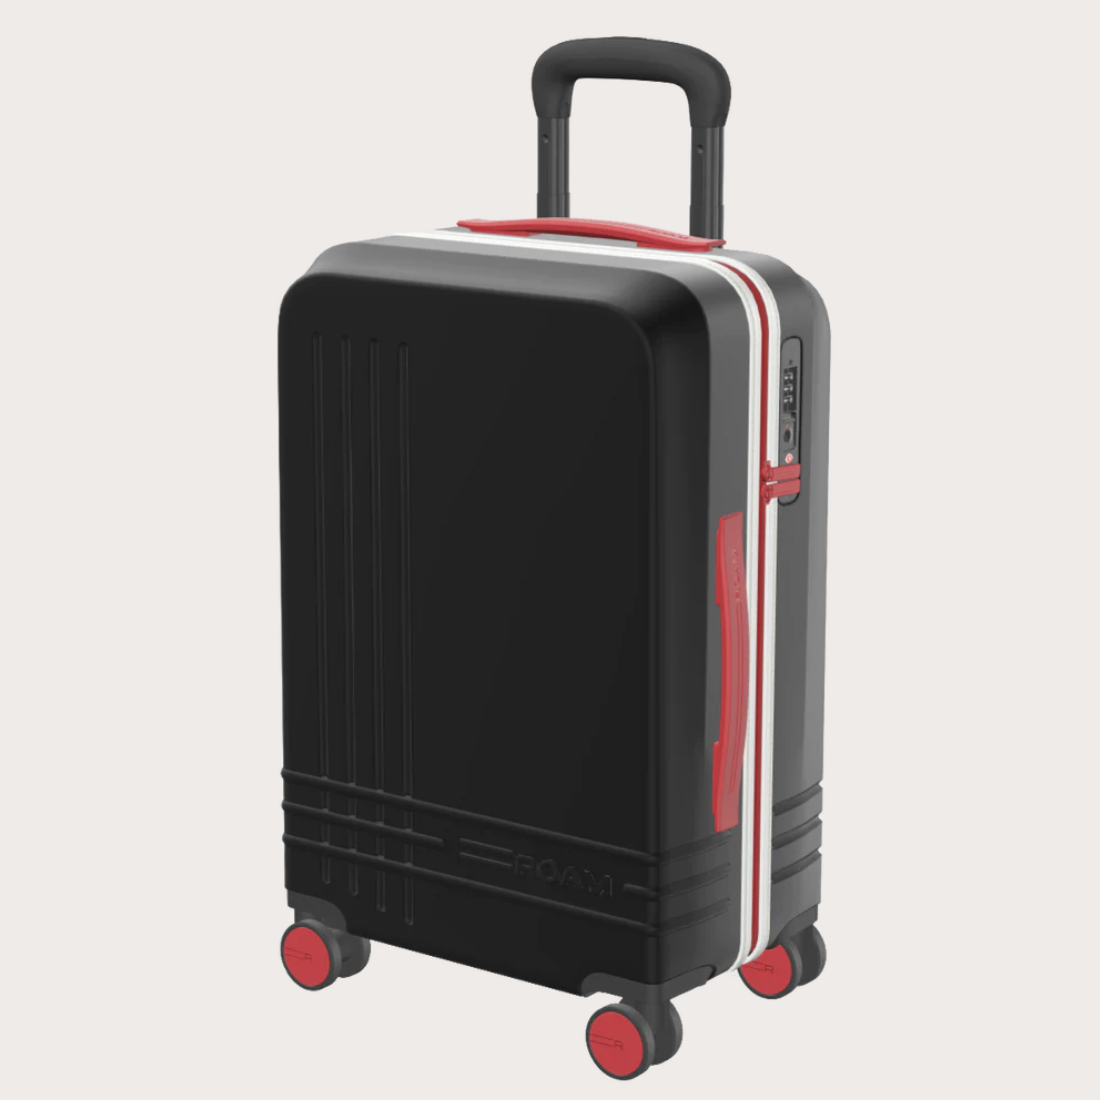 ROAM Carry-On Expandable